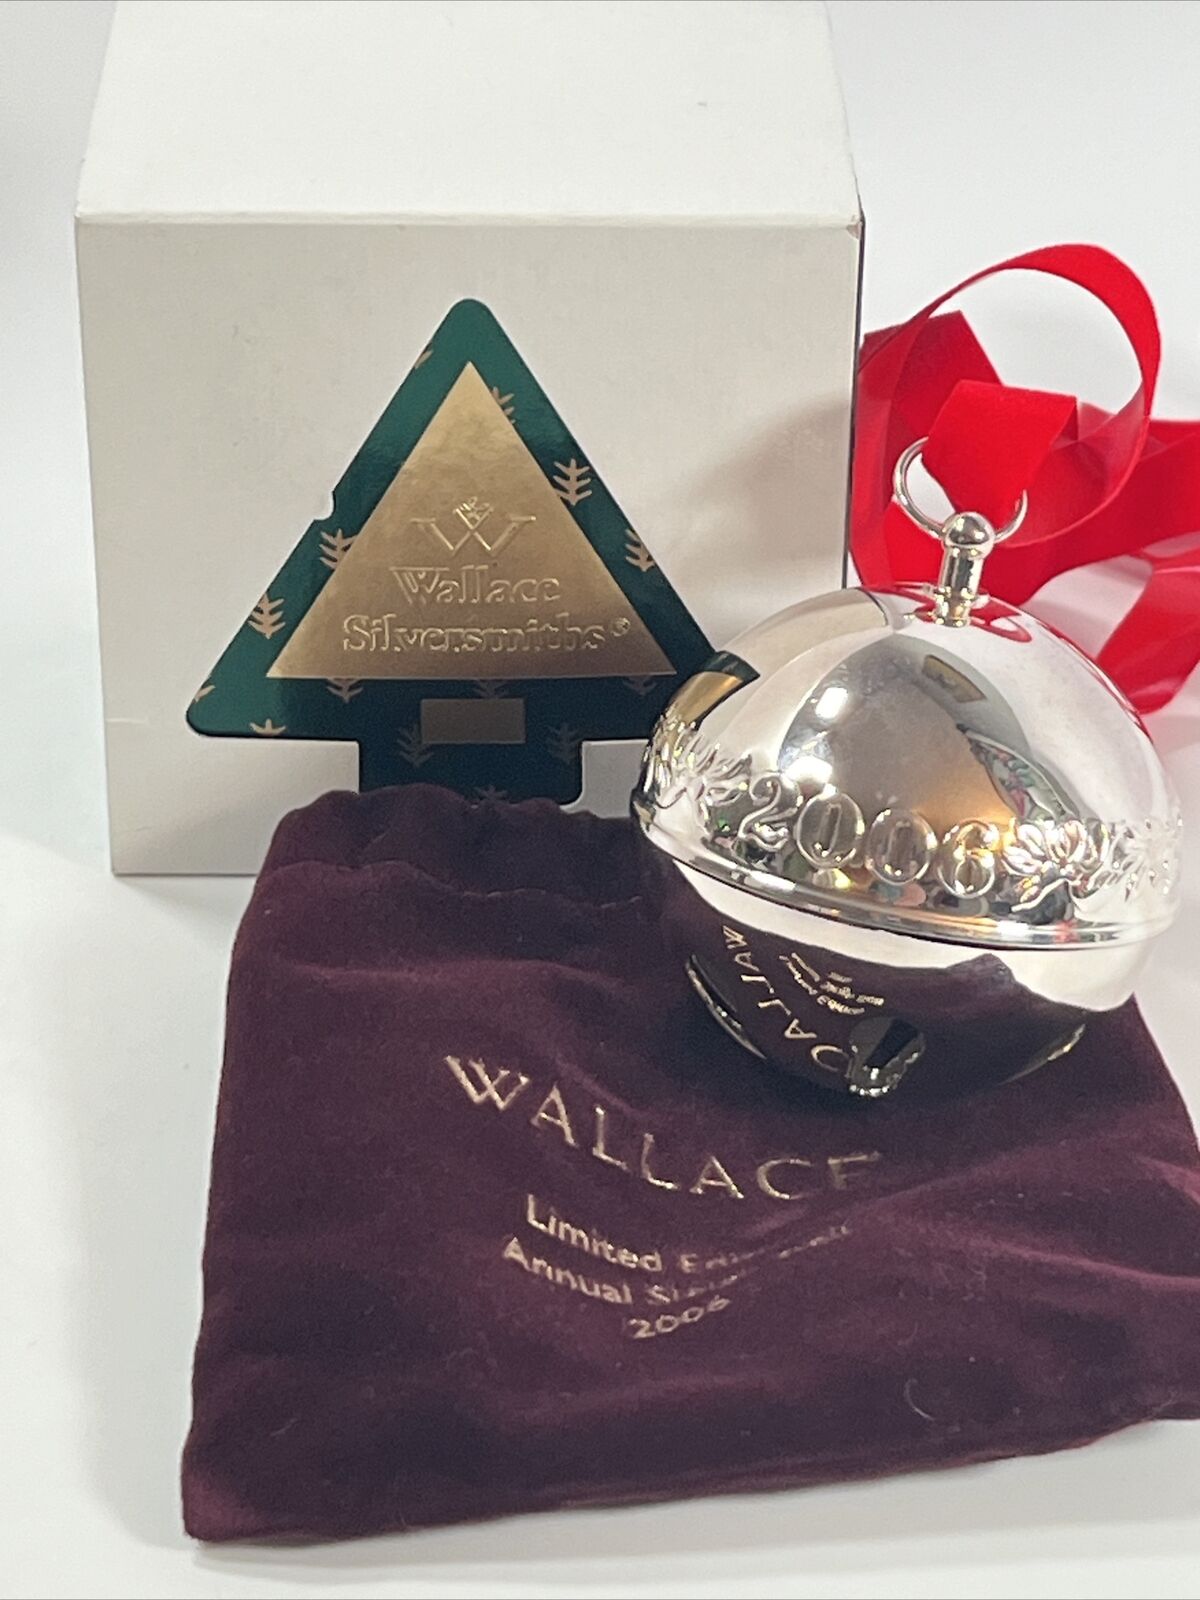 Wallace Silversmiths Limited Edition 2006 Annual Christmas Sleigh Bell